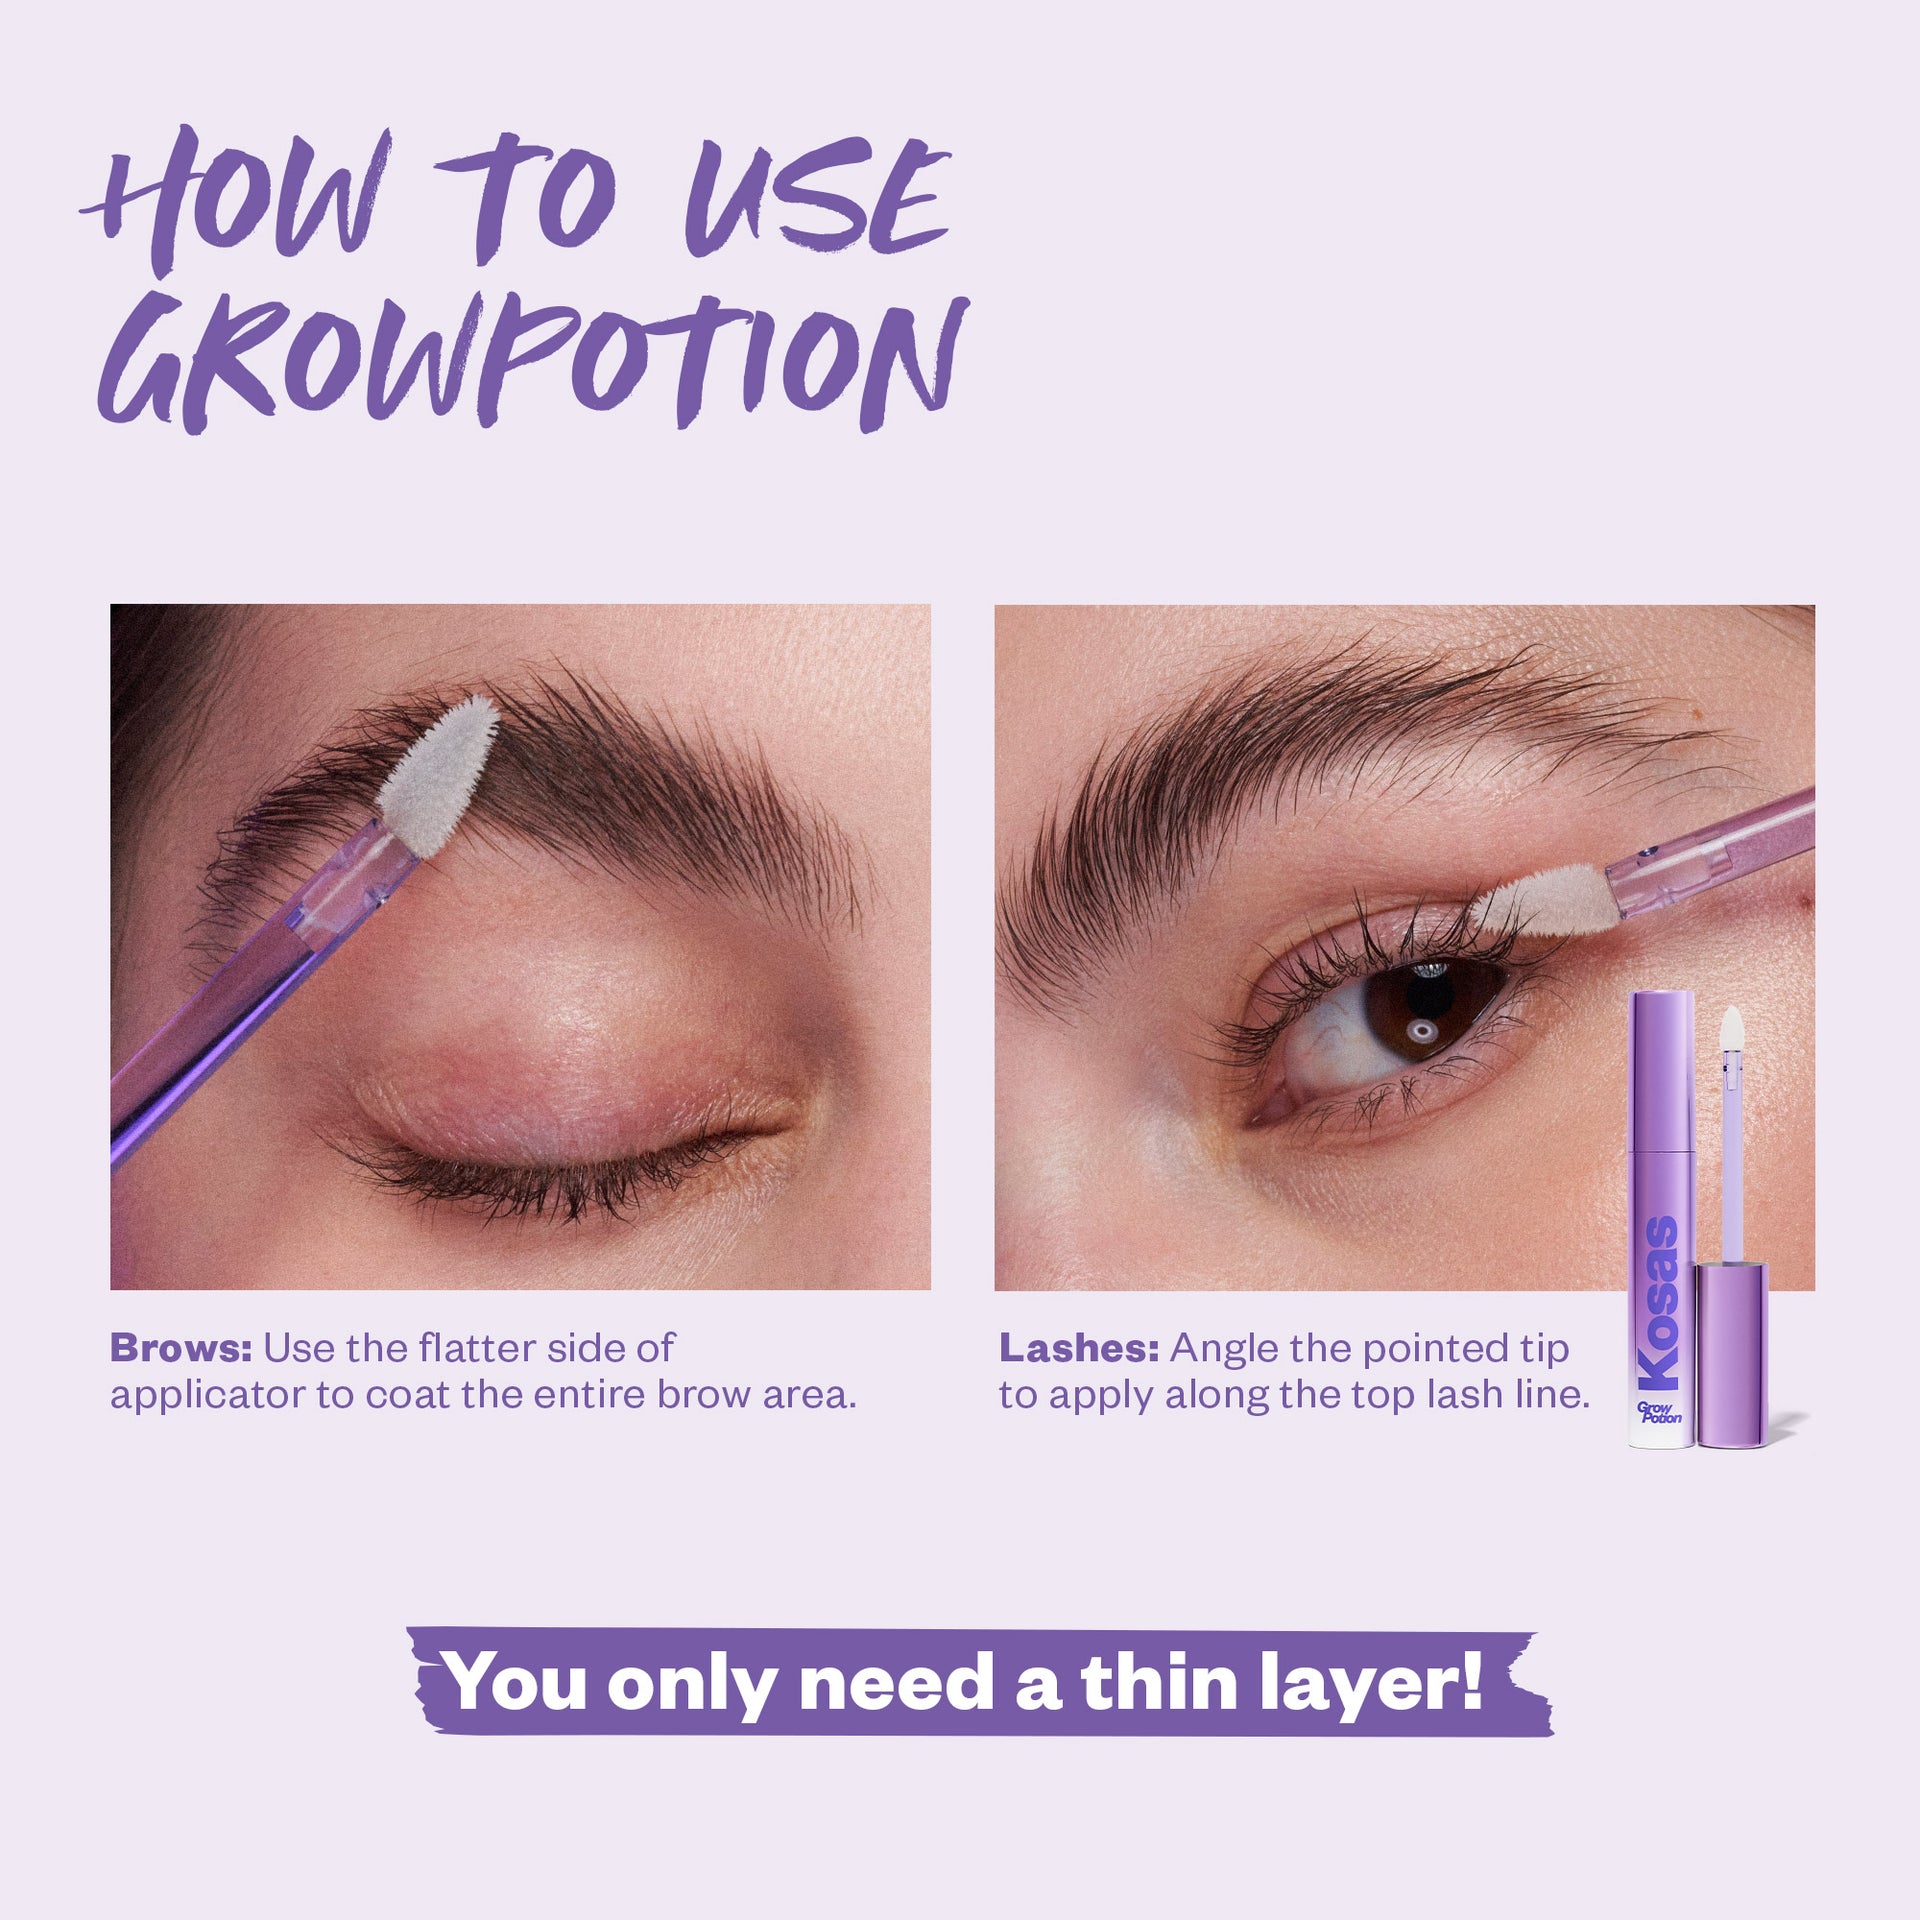 image guide on how to use the Grow Potion for Brows and Lashes.